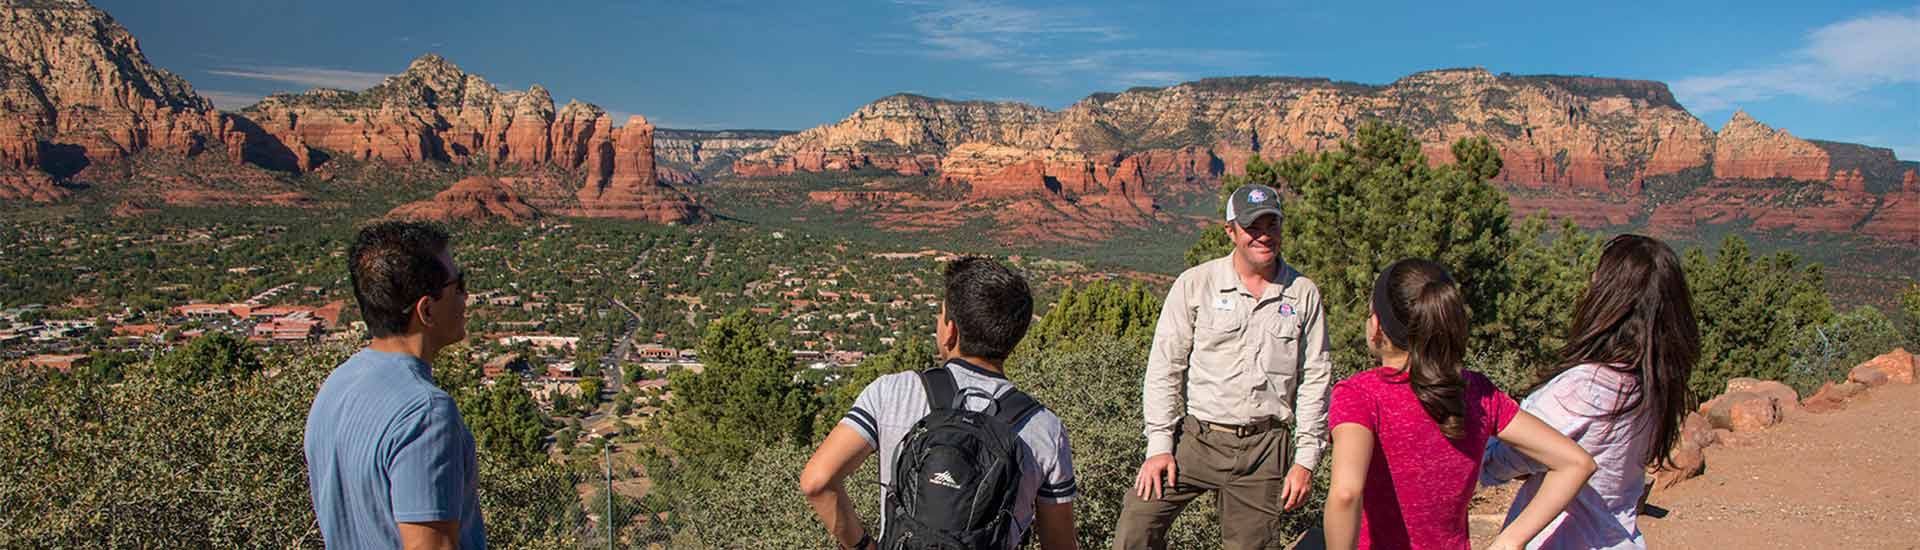 Pink Jeep guide and family on Sedona 360 Tour overlooking the town and red rocks from Airport Mesa Overlook